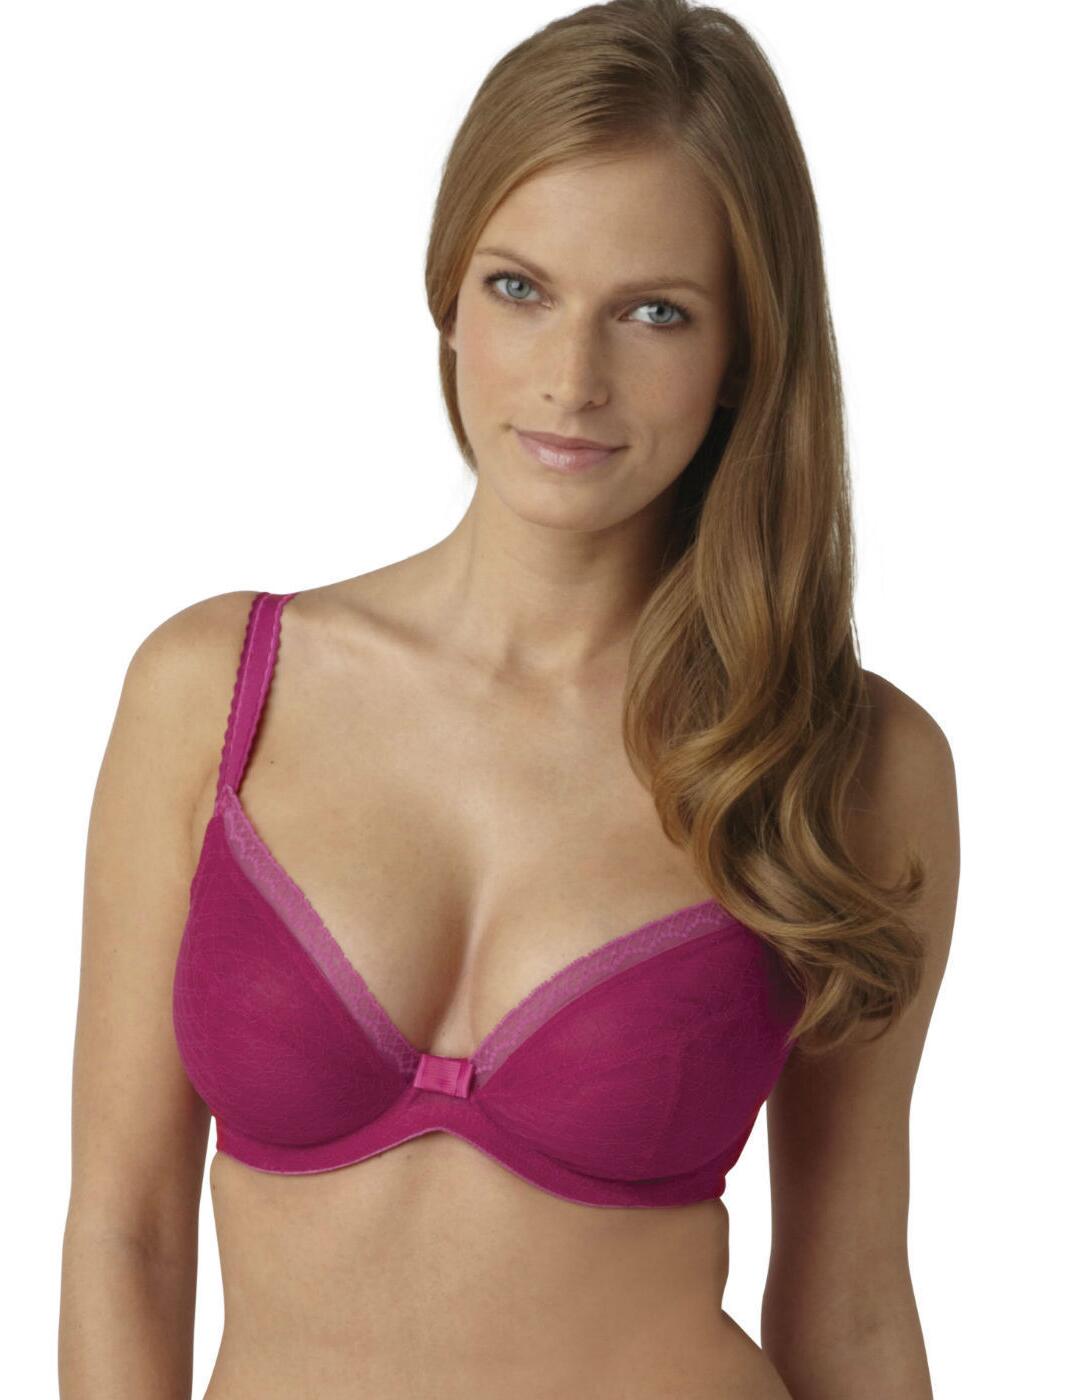 Panache Lingerie Fontaine 7766 Underwired Lace Plunge Bra - Rose Pink